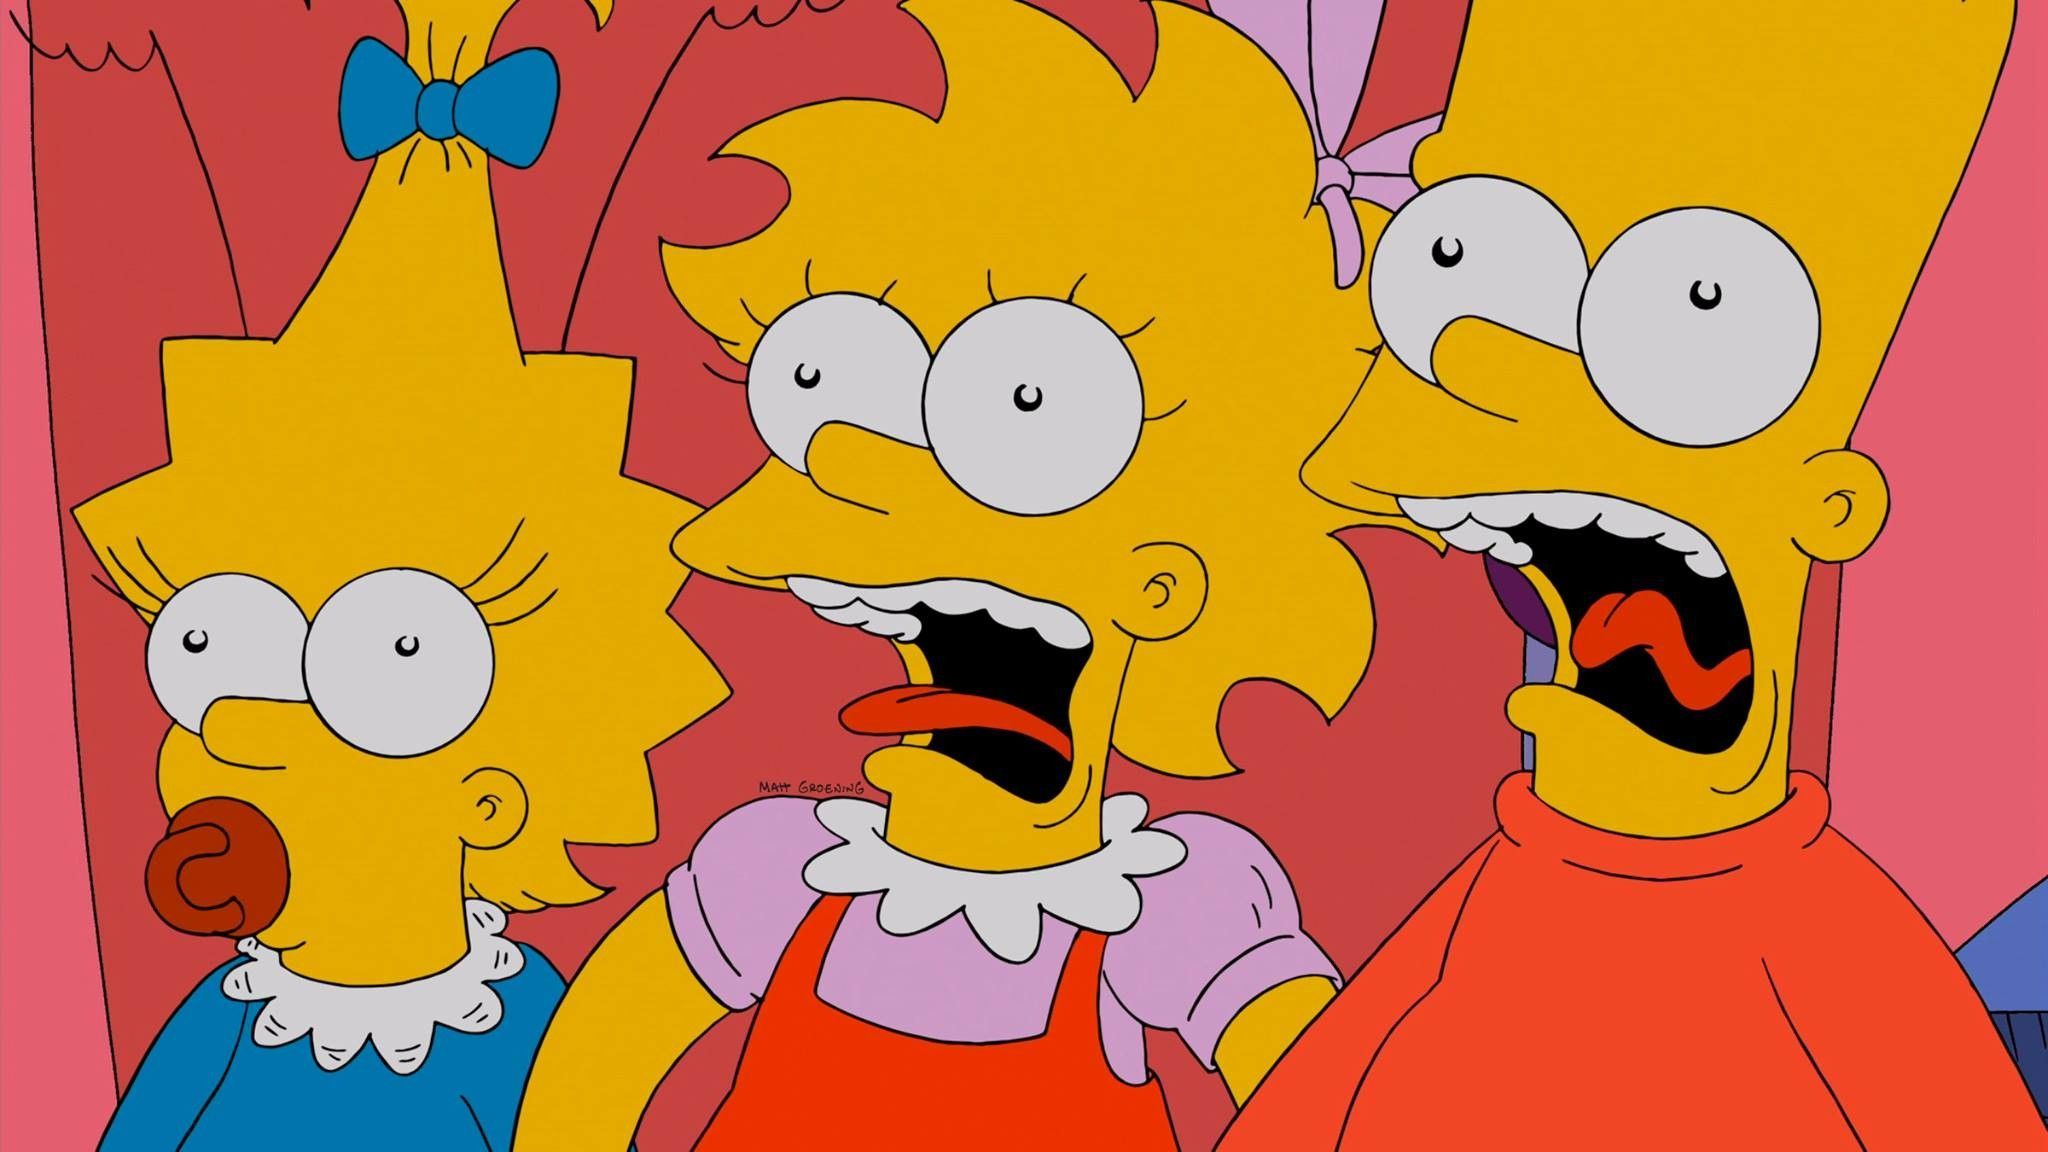 The simpsons are all looking at each other - Lisa Simpson, The Simpsons, Bart Simpson